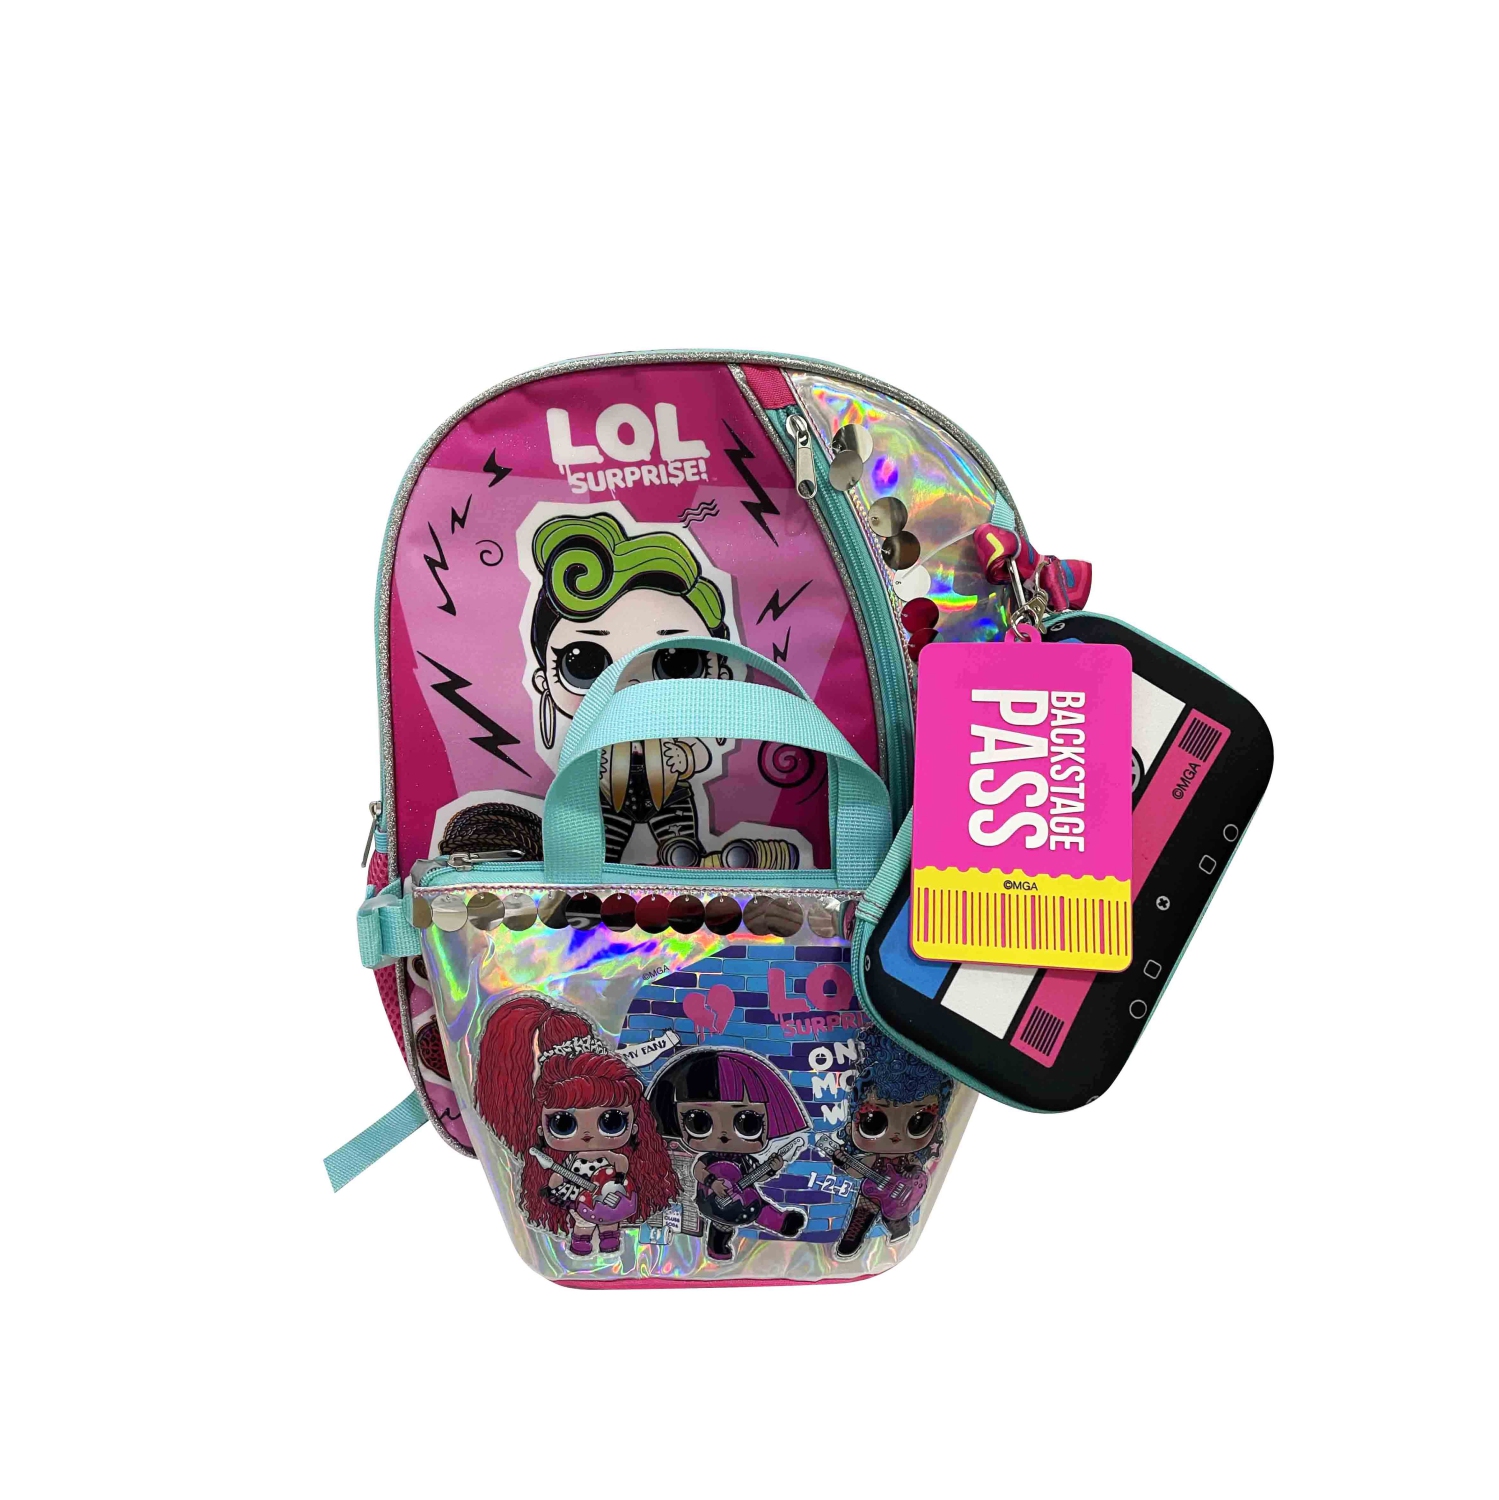 Lol Surprise Backpack with Detachable Hand Bag Purse Pencil Case Key Chain - 4 Piece Kids School Backpack Set - Girls Shoulder Book Bag Printed Lol Surprise Characters